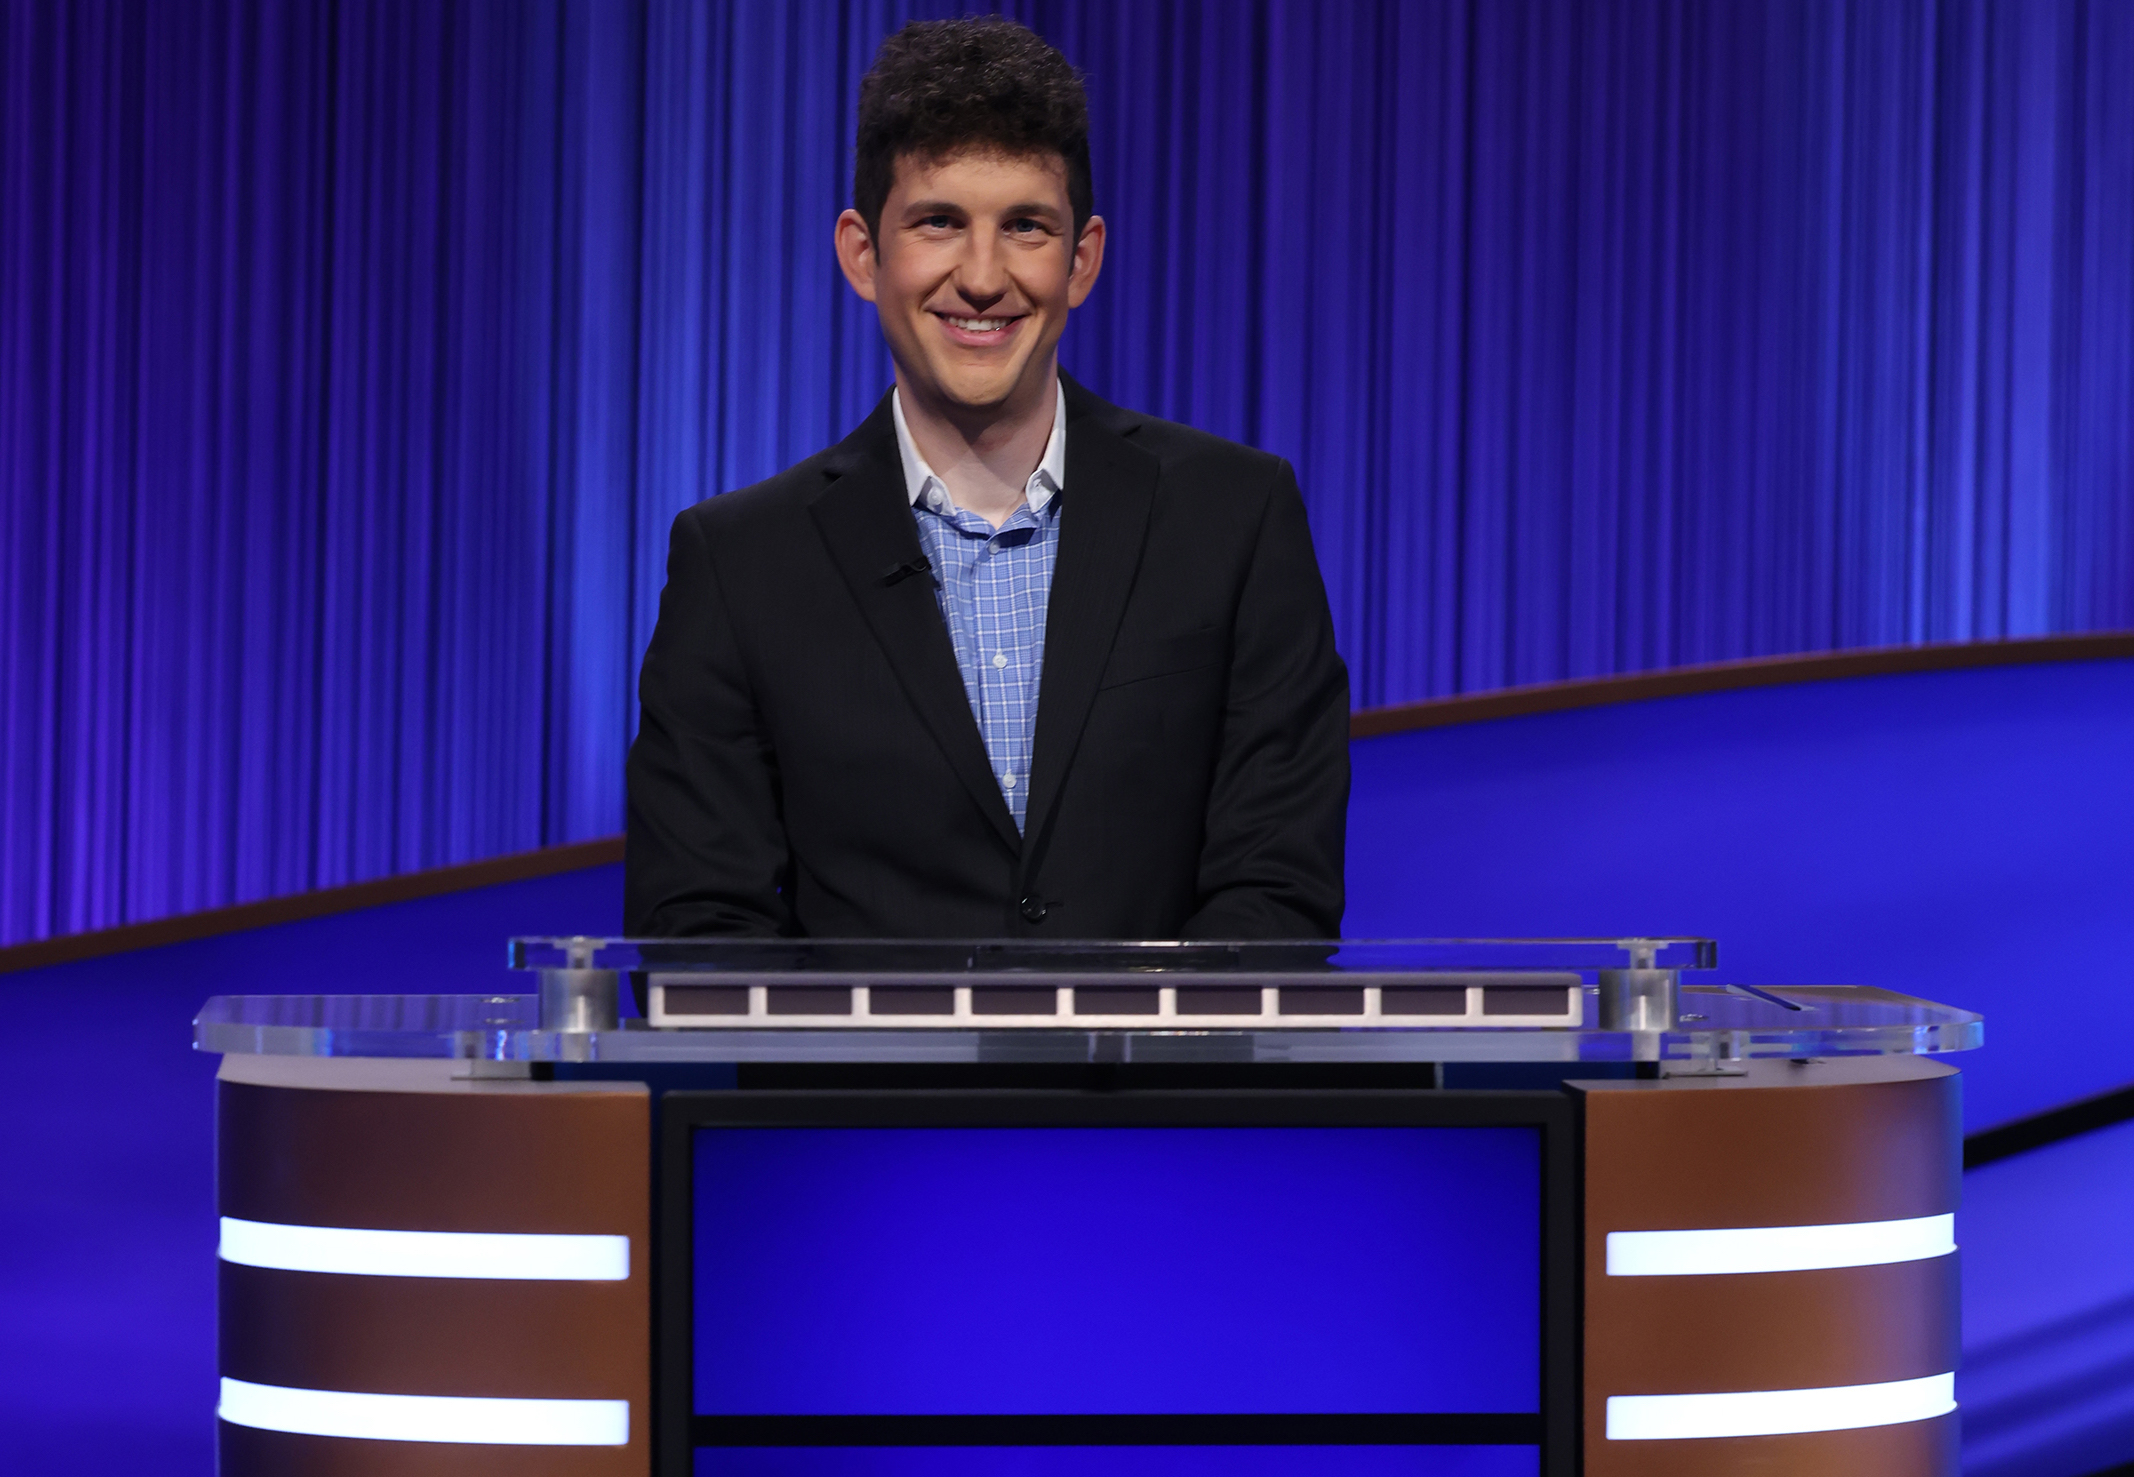 What's next for ex-'Jeopardy!' producer Mike Richards after firing